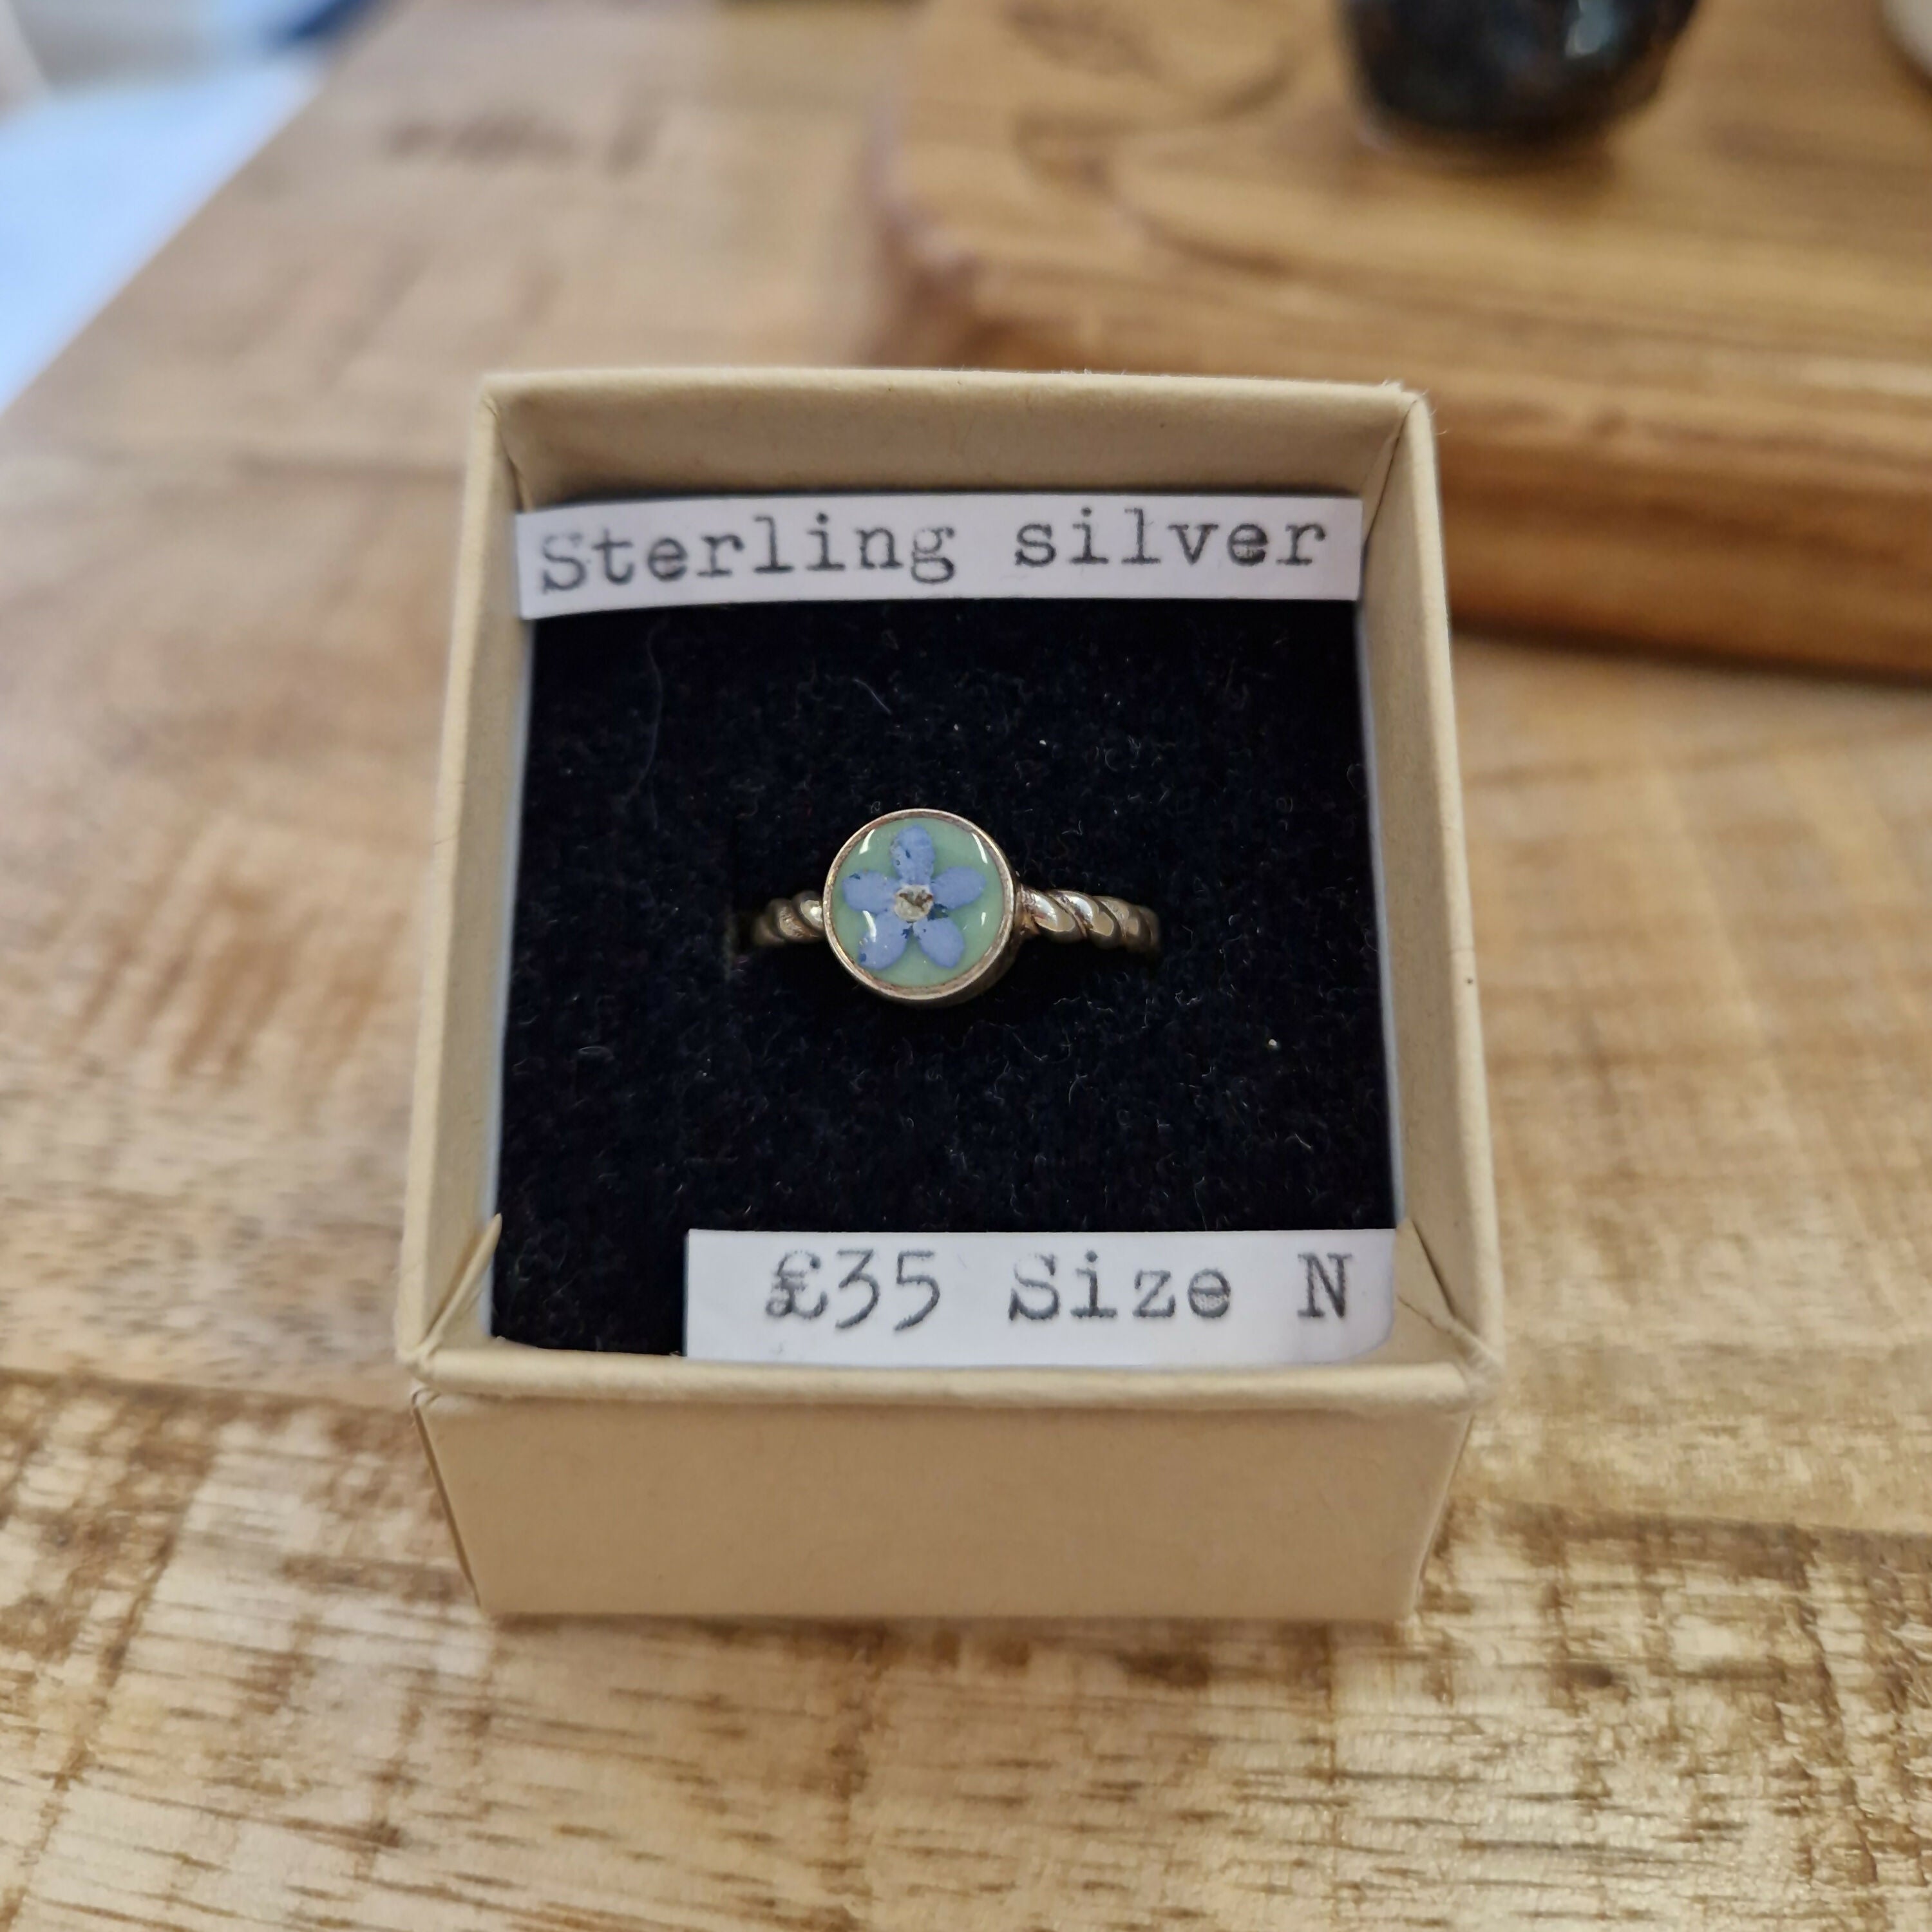 Forget me not Sterling silver ring Size N